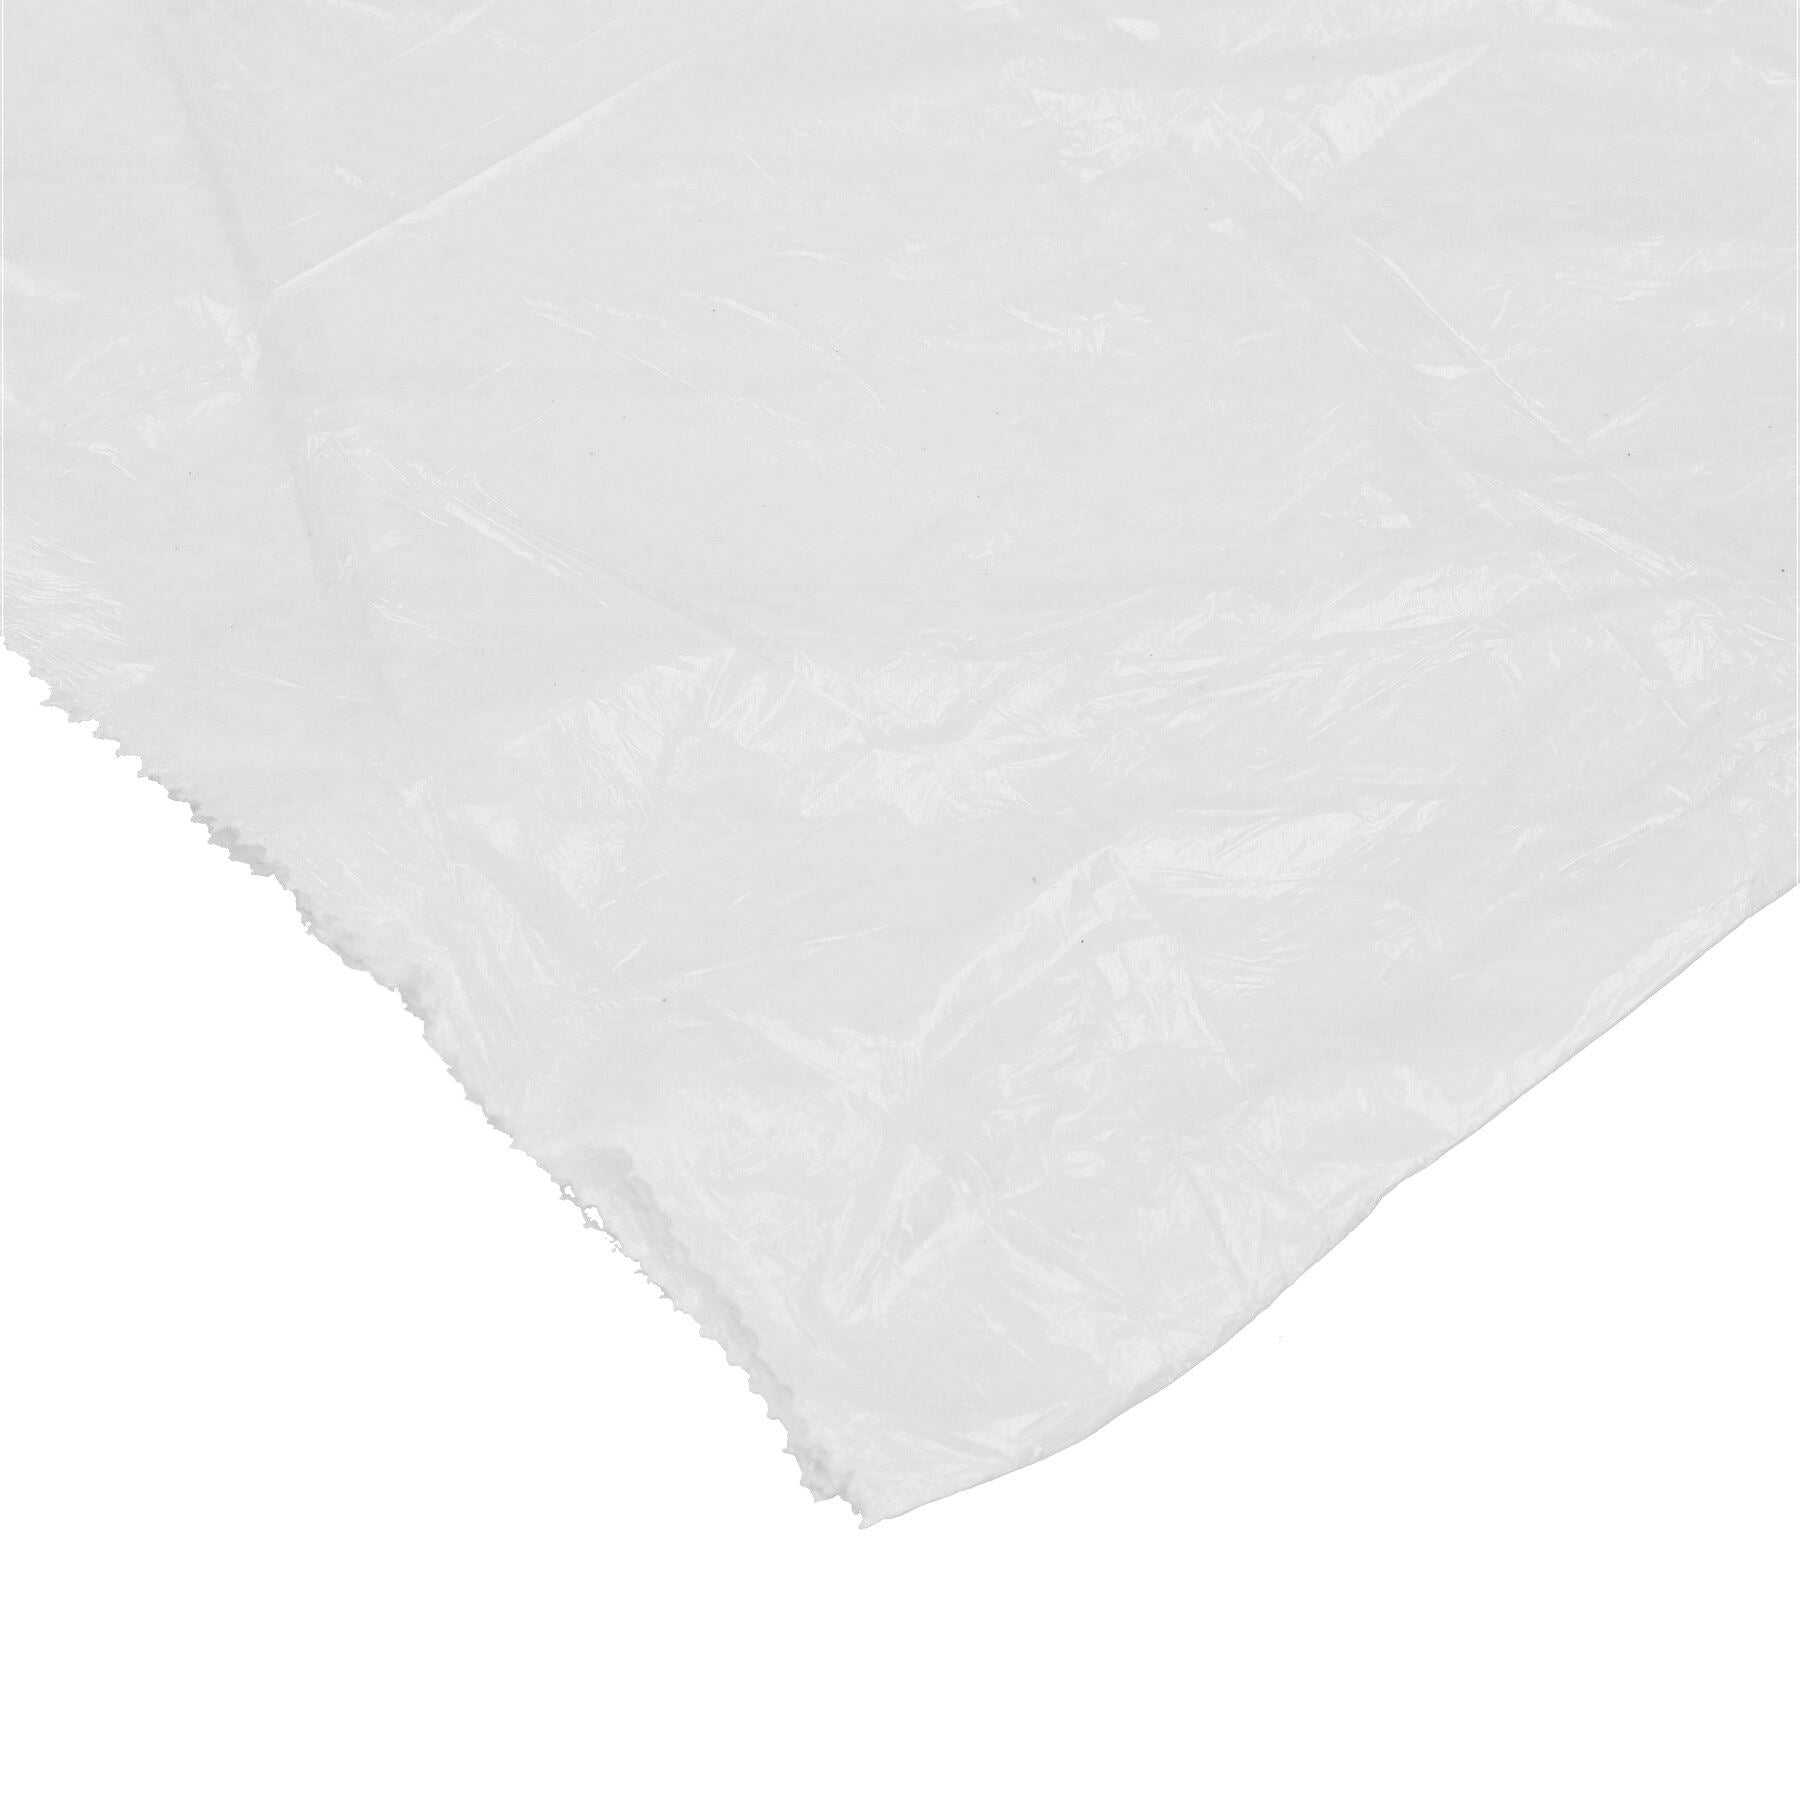 Heavy Duty Large Polythene Dust Sheet Cover For Decorating Painting 4m x 5m